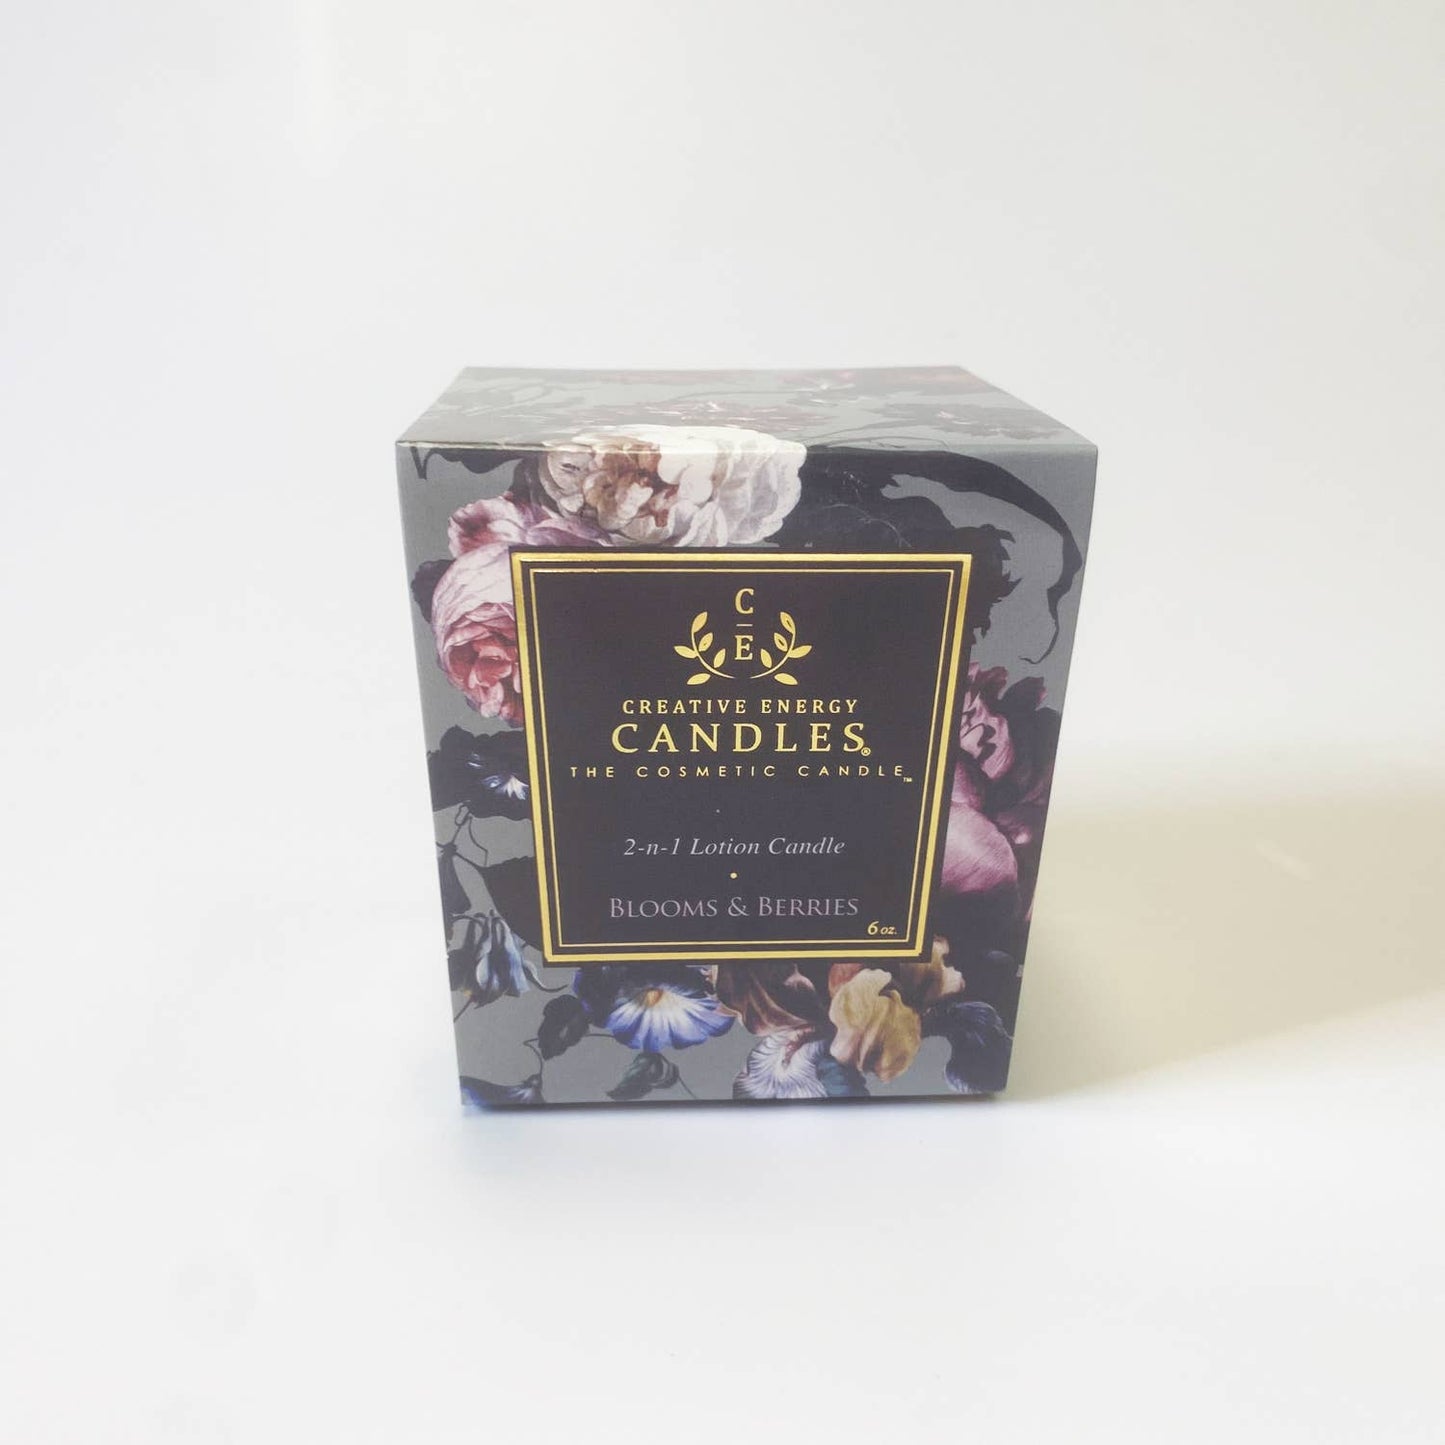 Creative Energy Candles - Blooms & Berries: 2-in-1 Soy Lotion Candle: Large - 10 oz